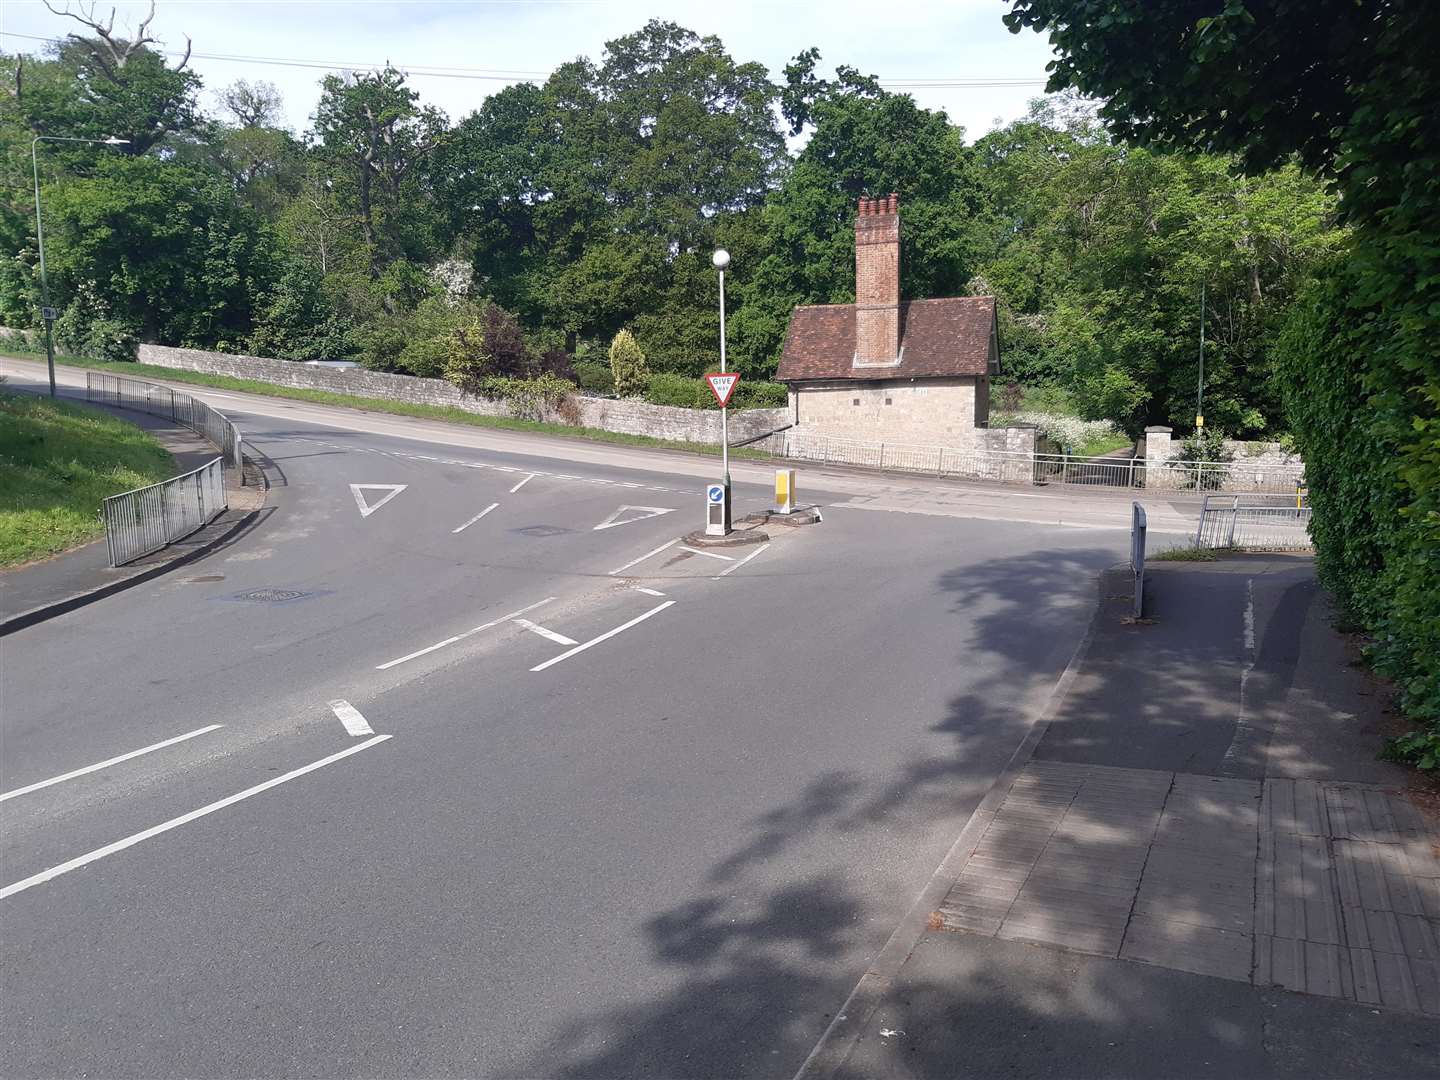 The junction approach from Deringwood Drive